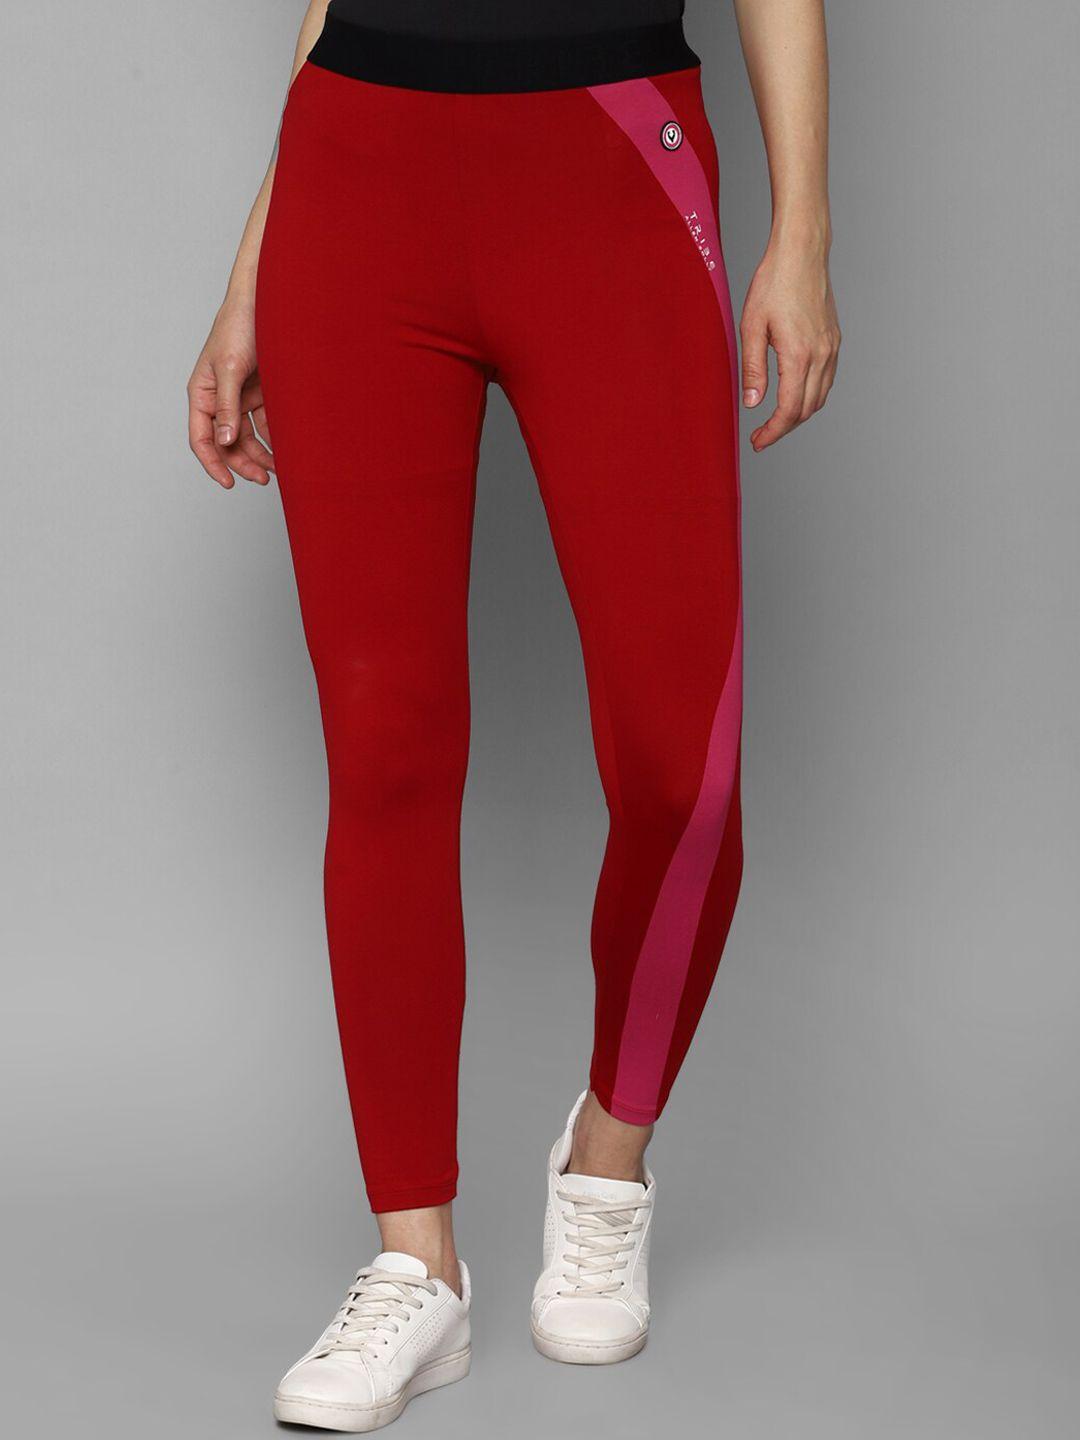 allen-solly-woman-women-red-colourblocked-tights